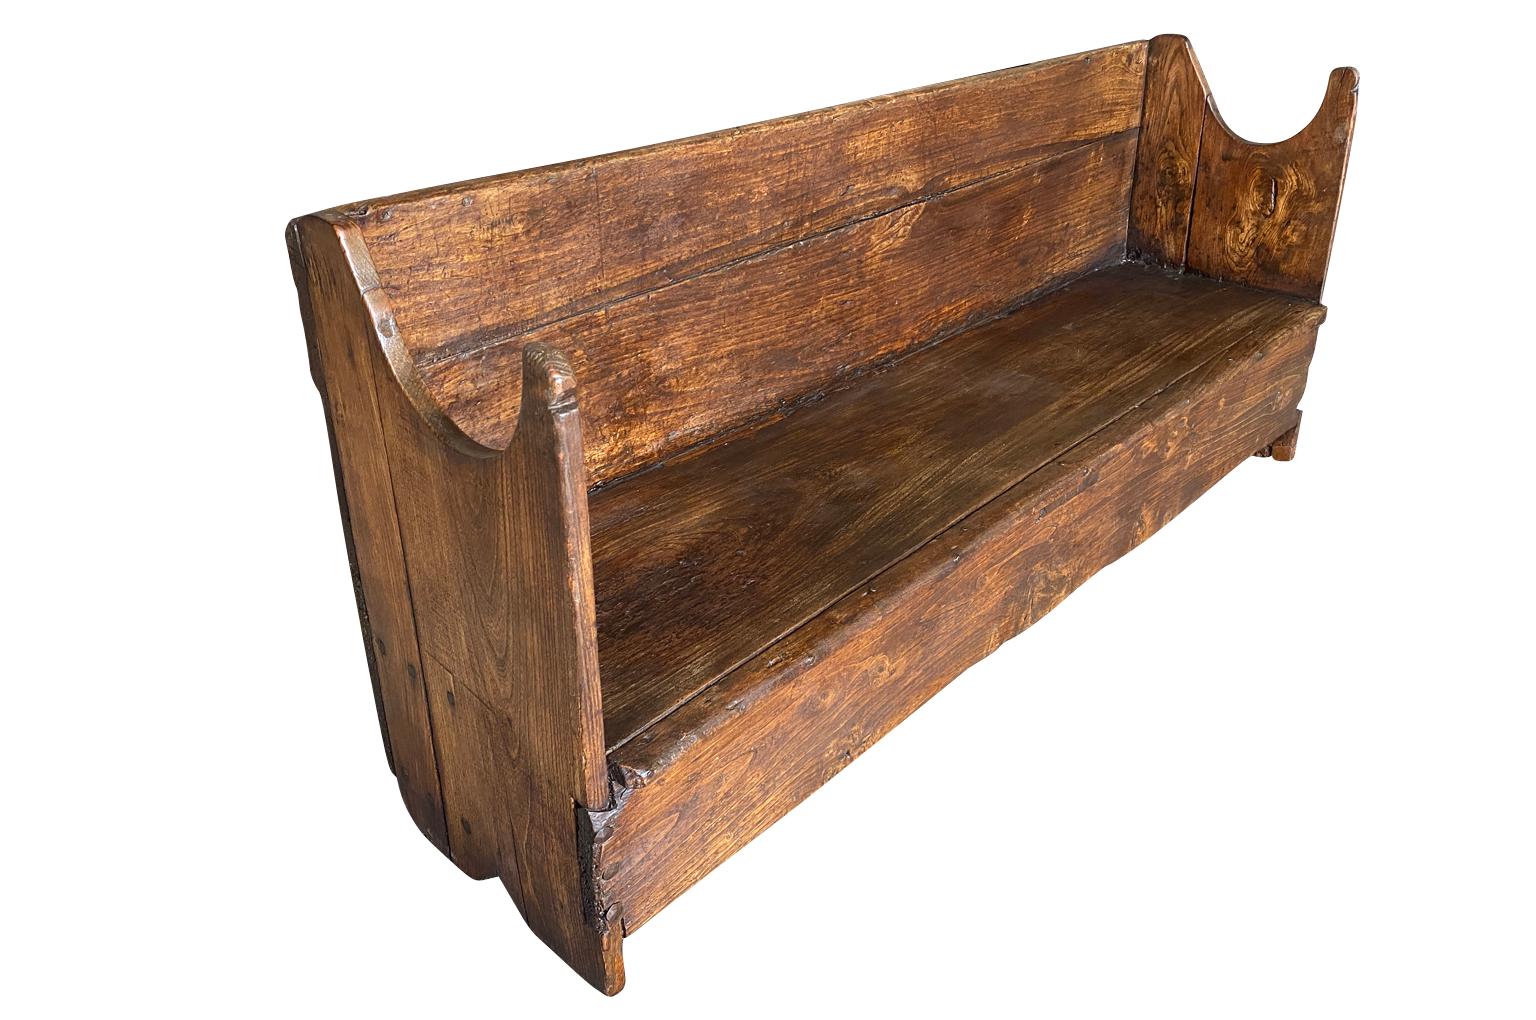 A very charming 18th century primitive Bench from the Catalan region of Spain.  Soundly constructed from chestnut and pine with back and sides.  The seat height is 14